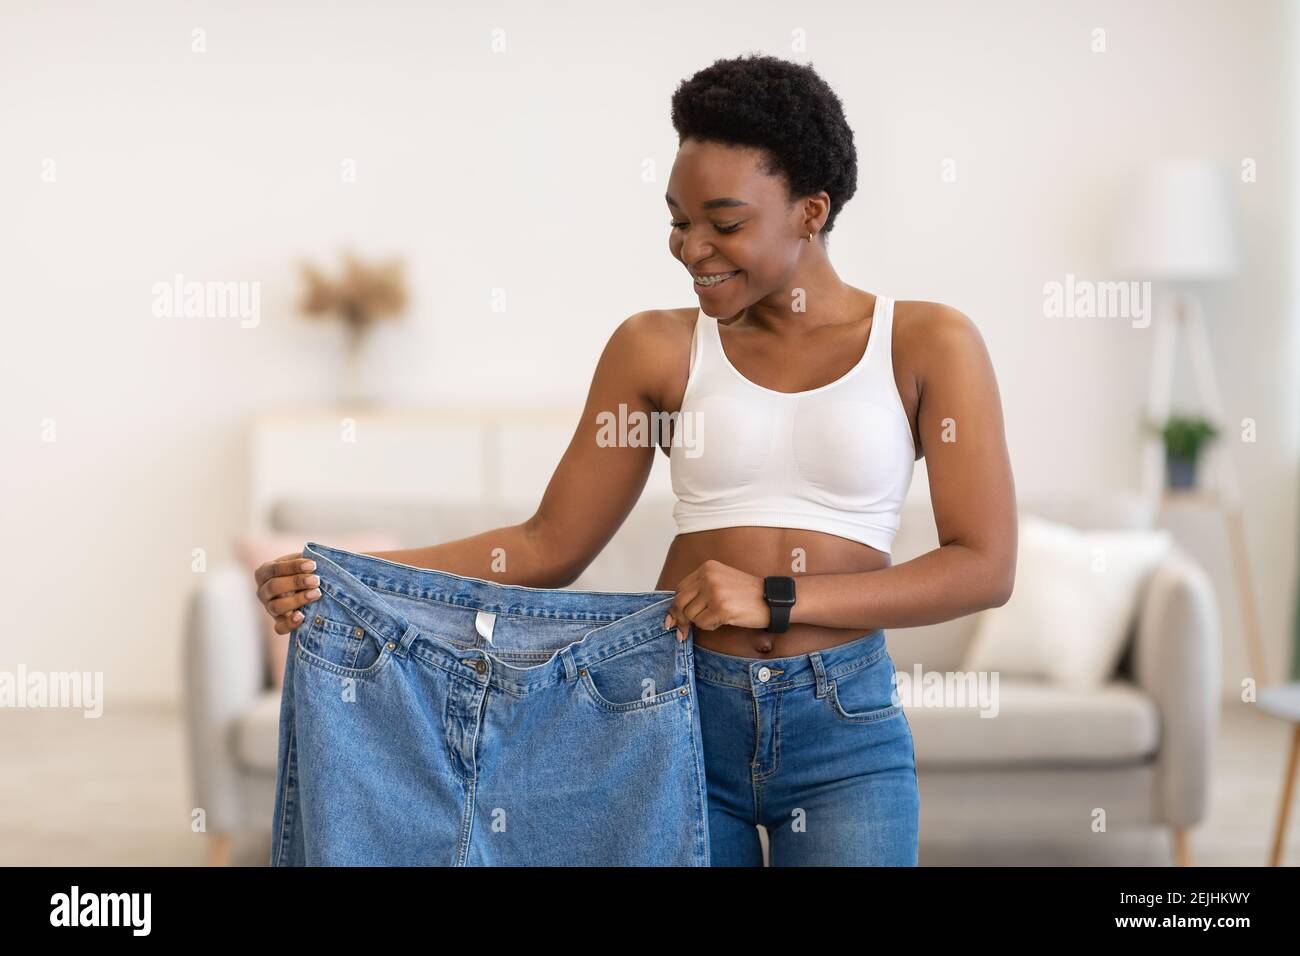 Black Lady Holding Jeans Too Big After Weight-Loss At Home Stock Photo